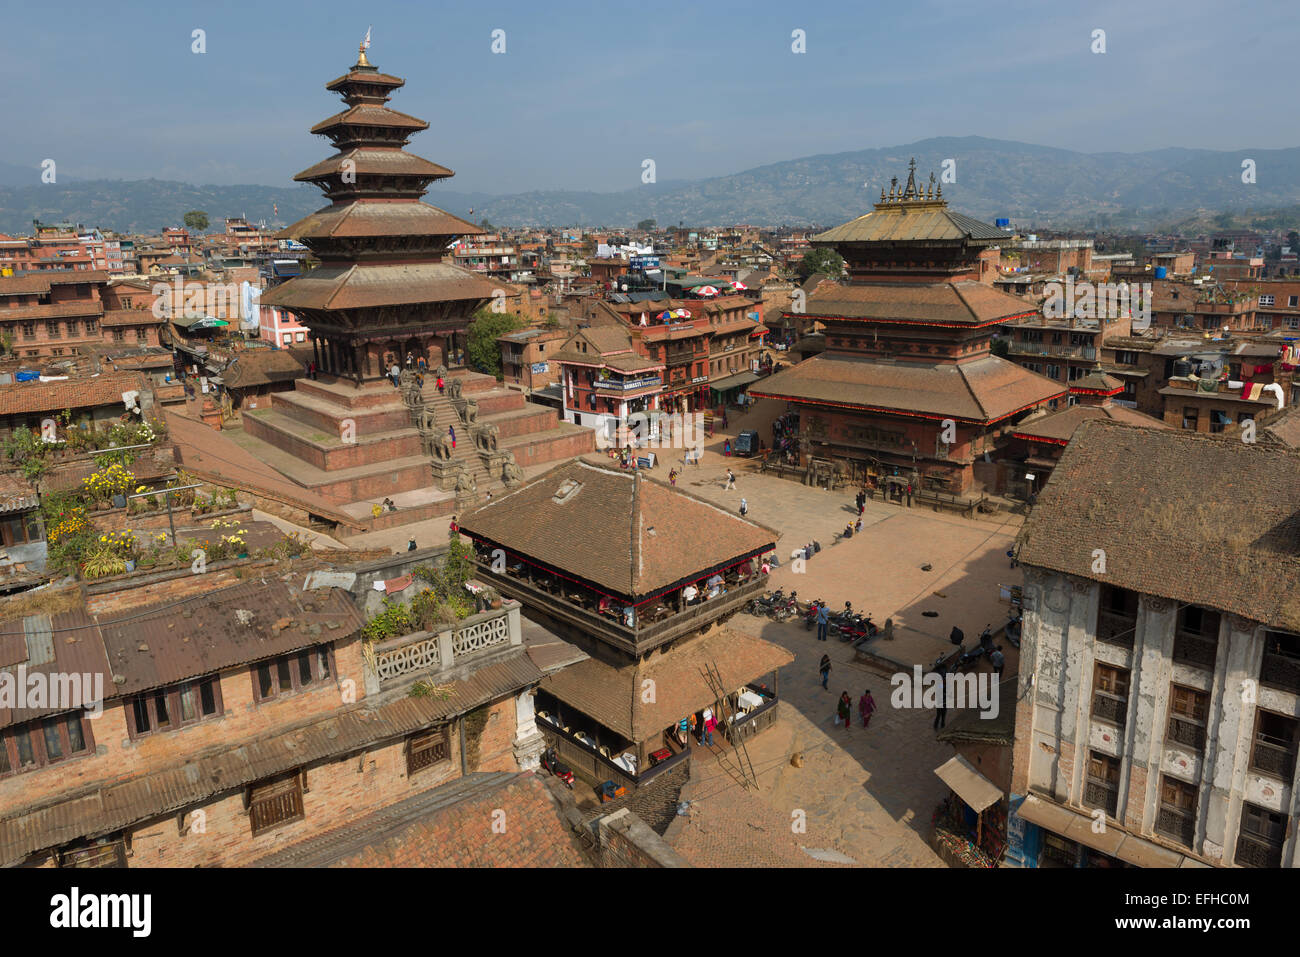 Buildings in the Taumadhi Square, including the 5-storey Nyatapola Temple, seen from the roof of the Bhadgaon Guest House, Bhaktapur, Kathmandu Valley, Nepal Stock Photo